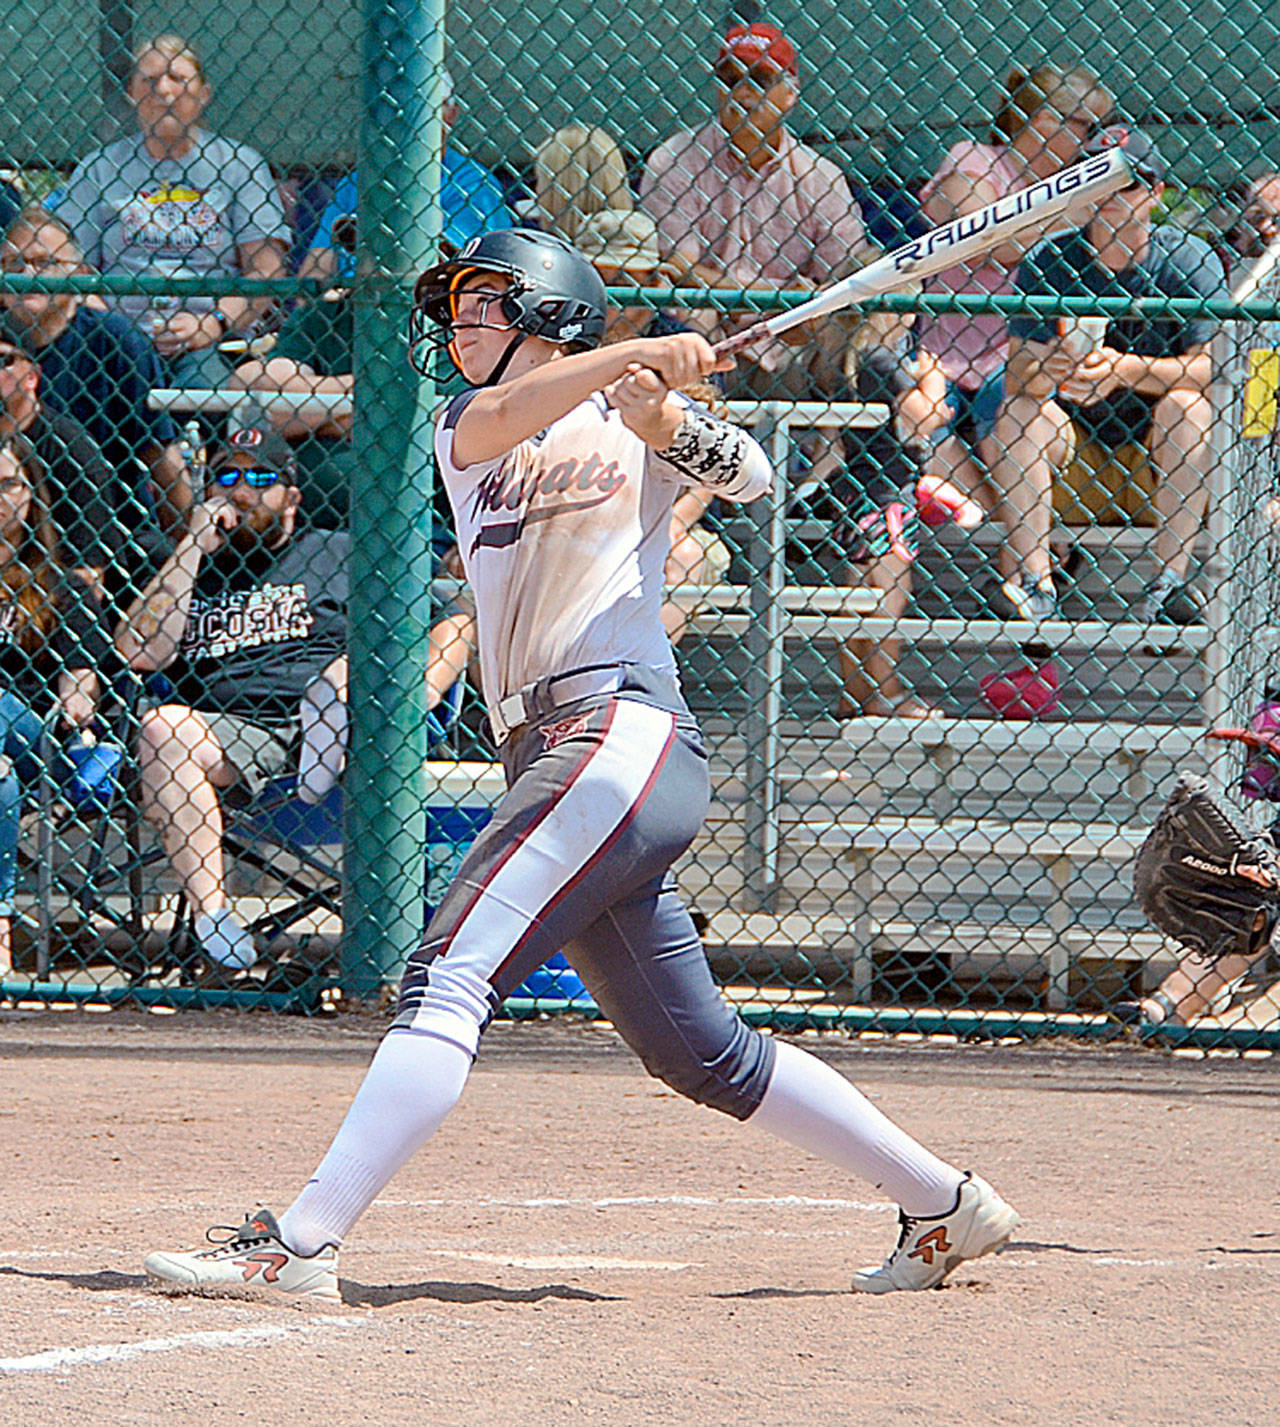 Ocosta’s reigning 2B Pacific League MVP, Kaylee Barnum, sends a base hit to left field during the 1B State Championship tournament in Yakima last season. (Photo by Michael Pedersen)